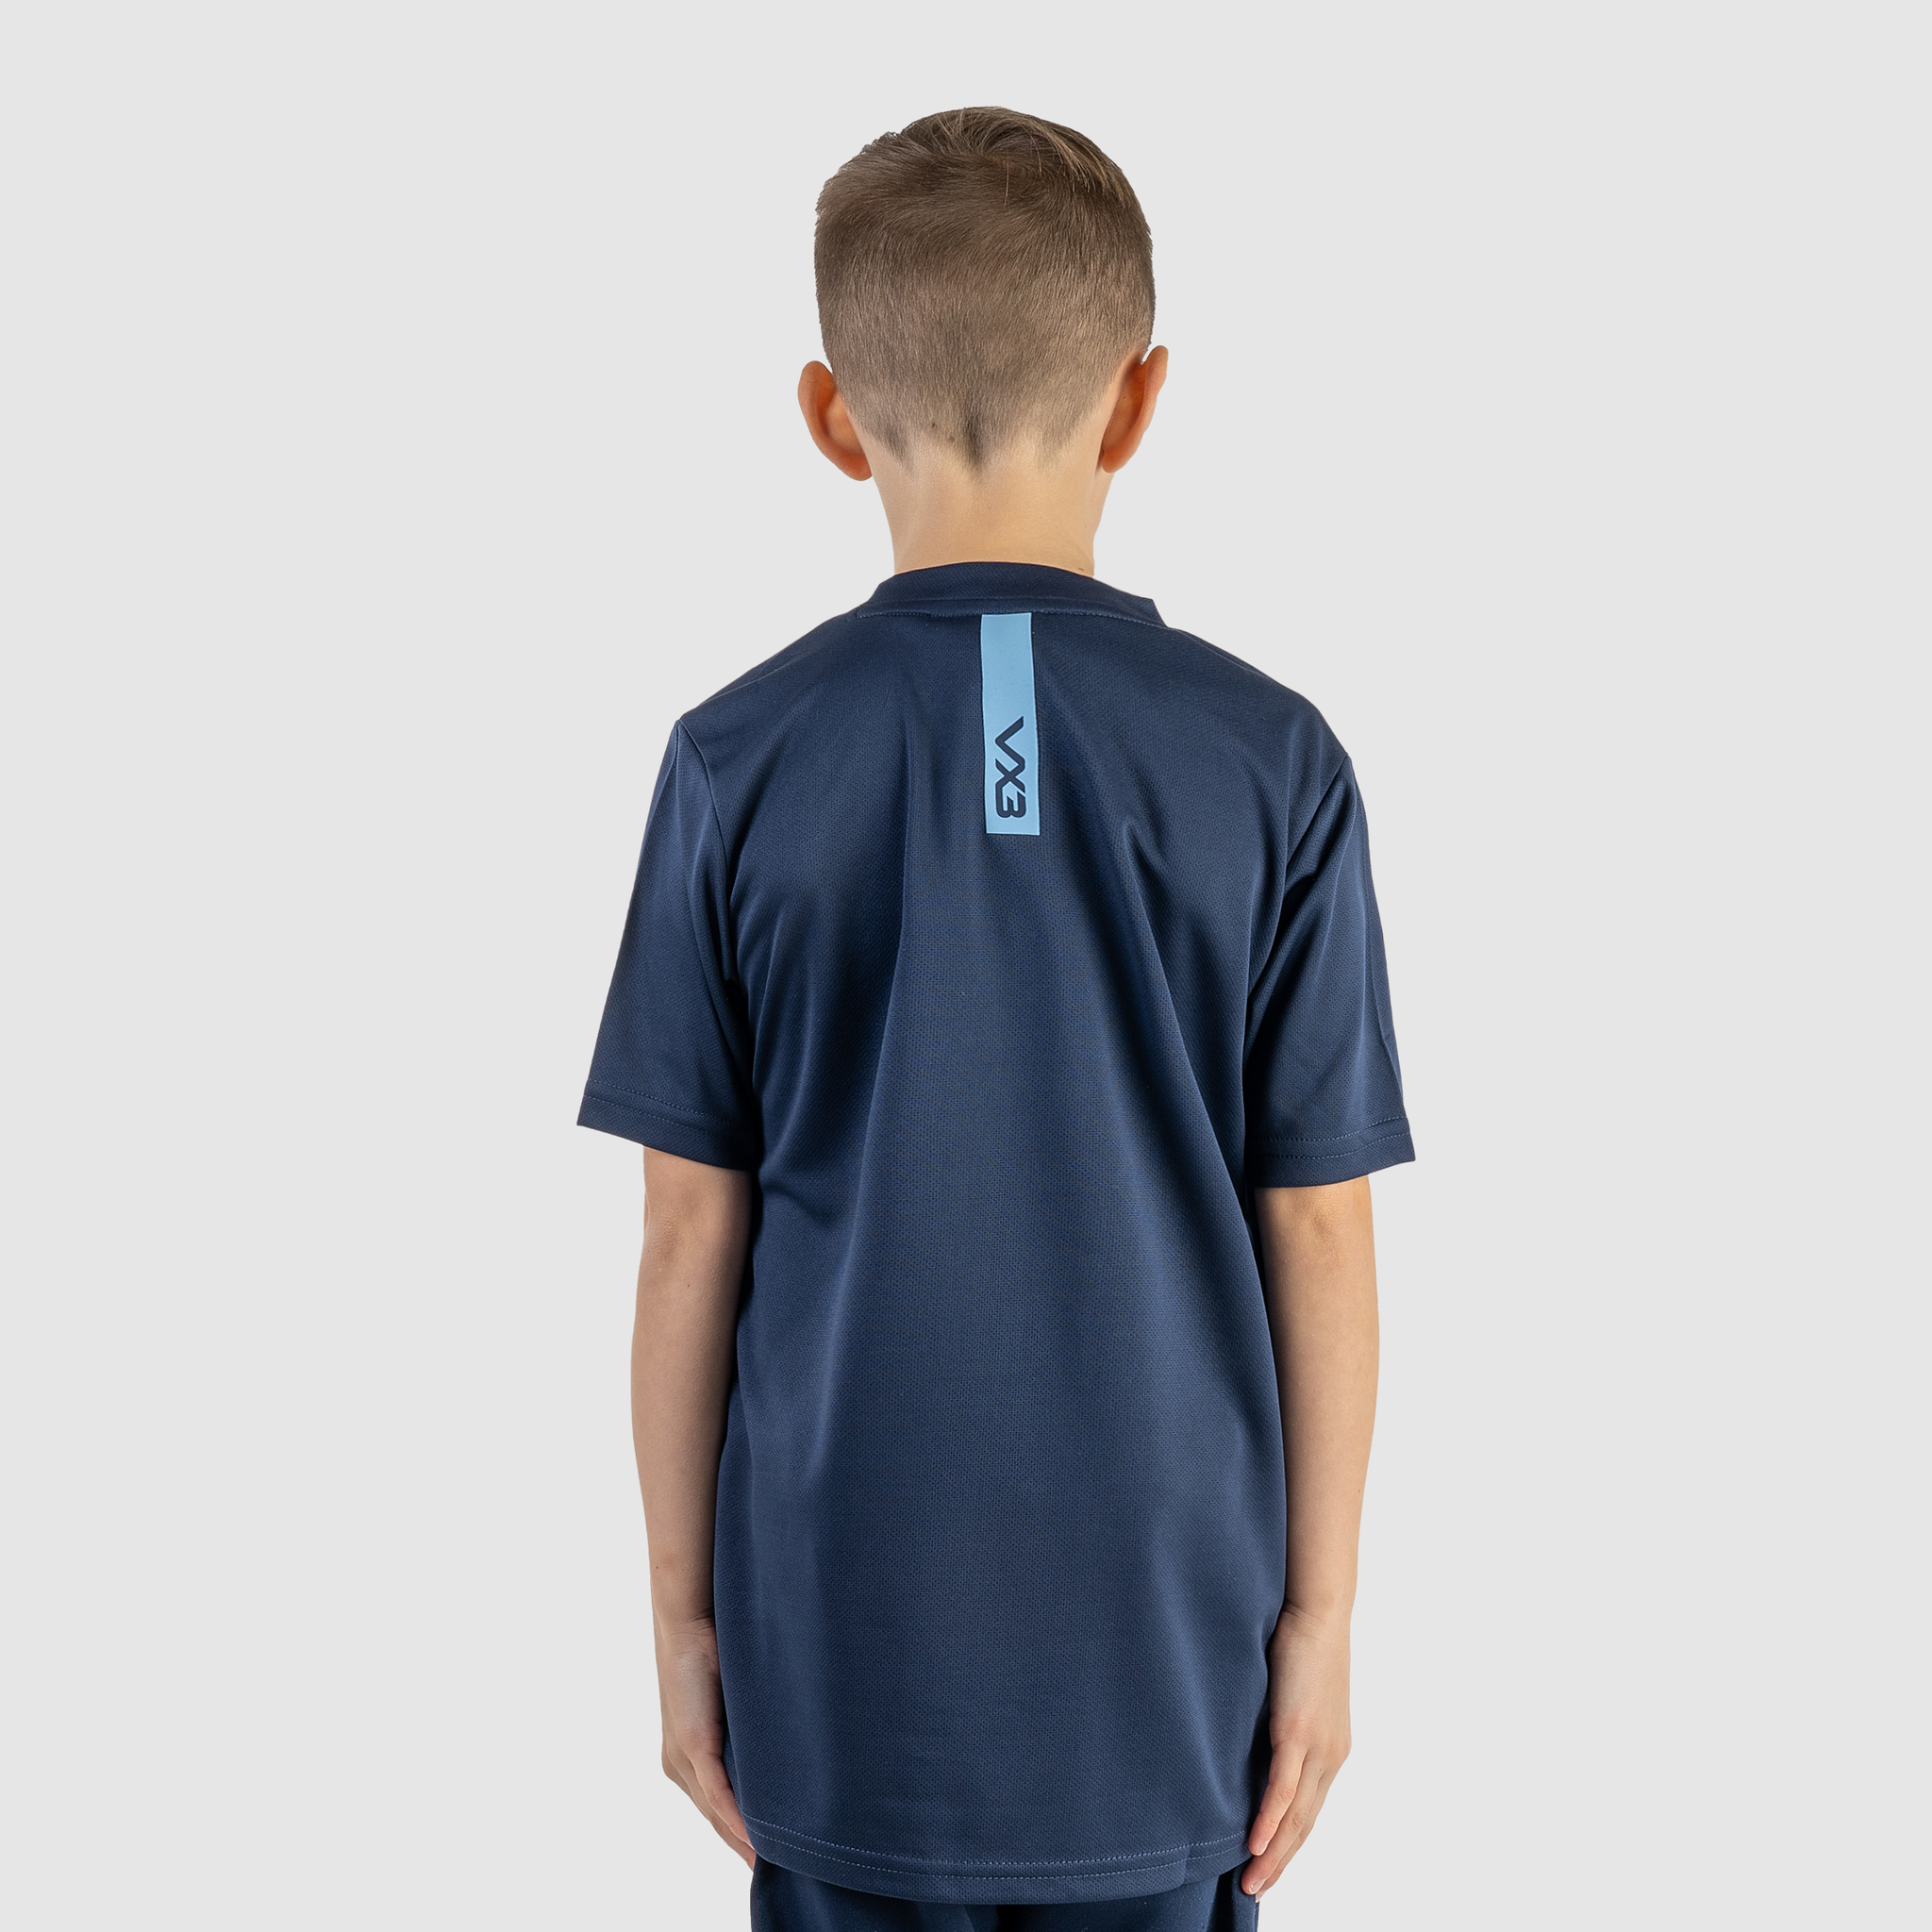 Fortis Youth Tee Navy/Sky